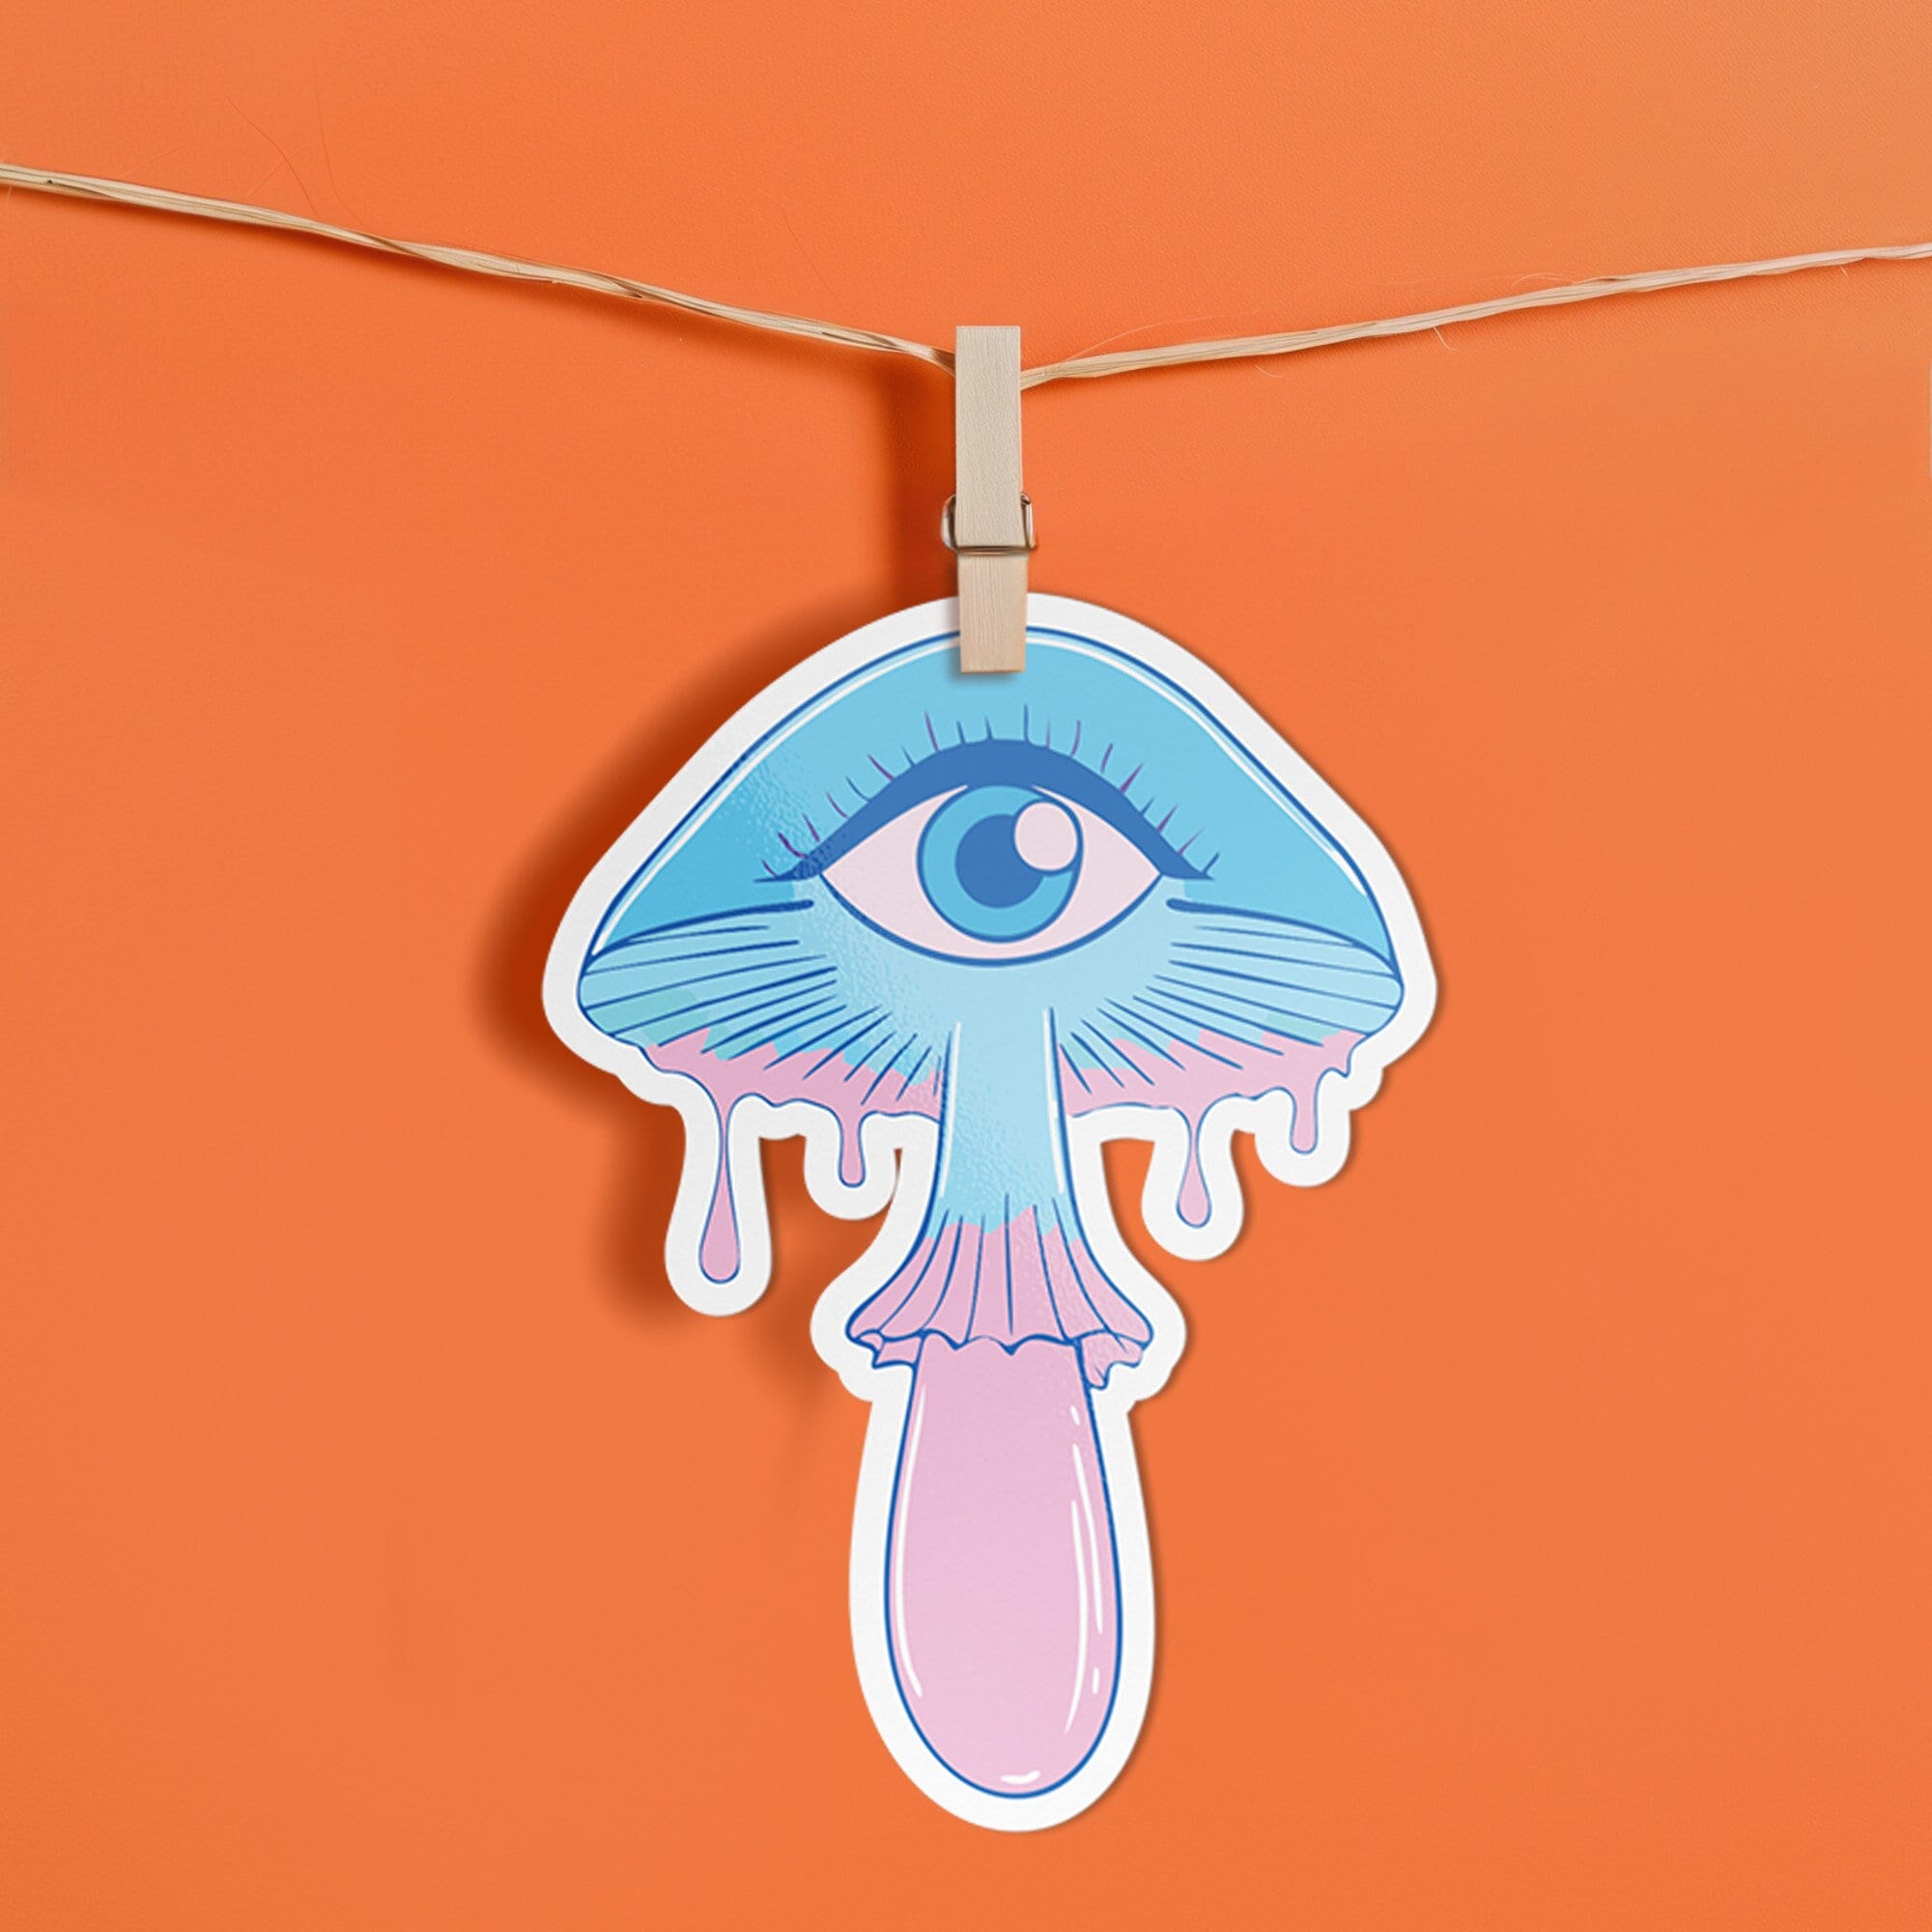 Surreal eyeball mushroom sticker in pastel colors, ideal for decorating laptops, phones, and water bottles. Available in Prism, Gem, and Glitter finishes. Handmade in Austin, Texas.